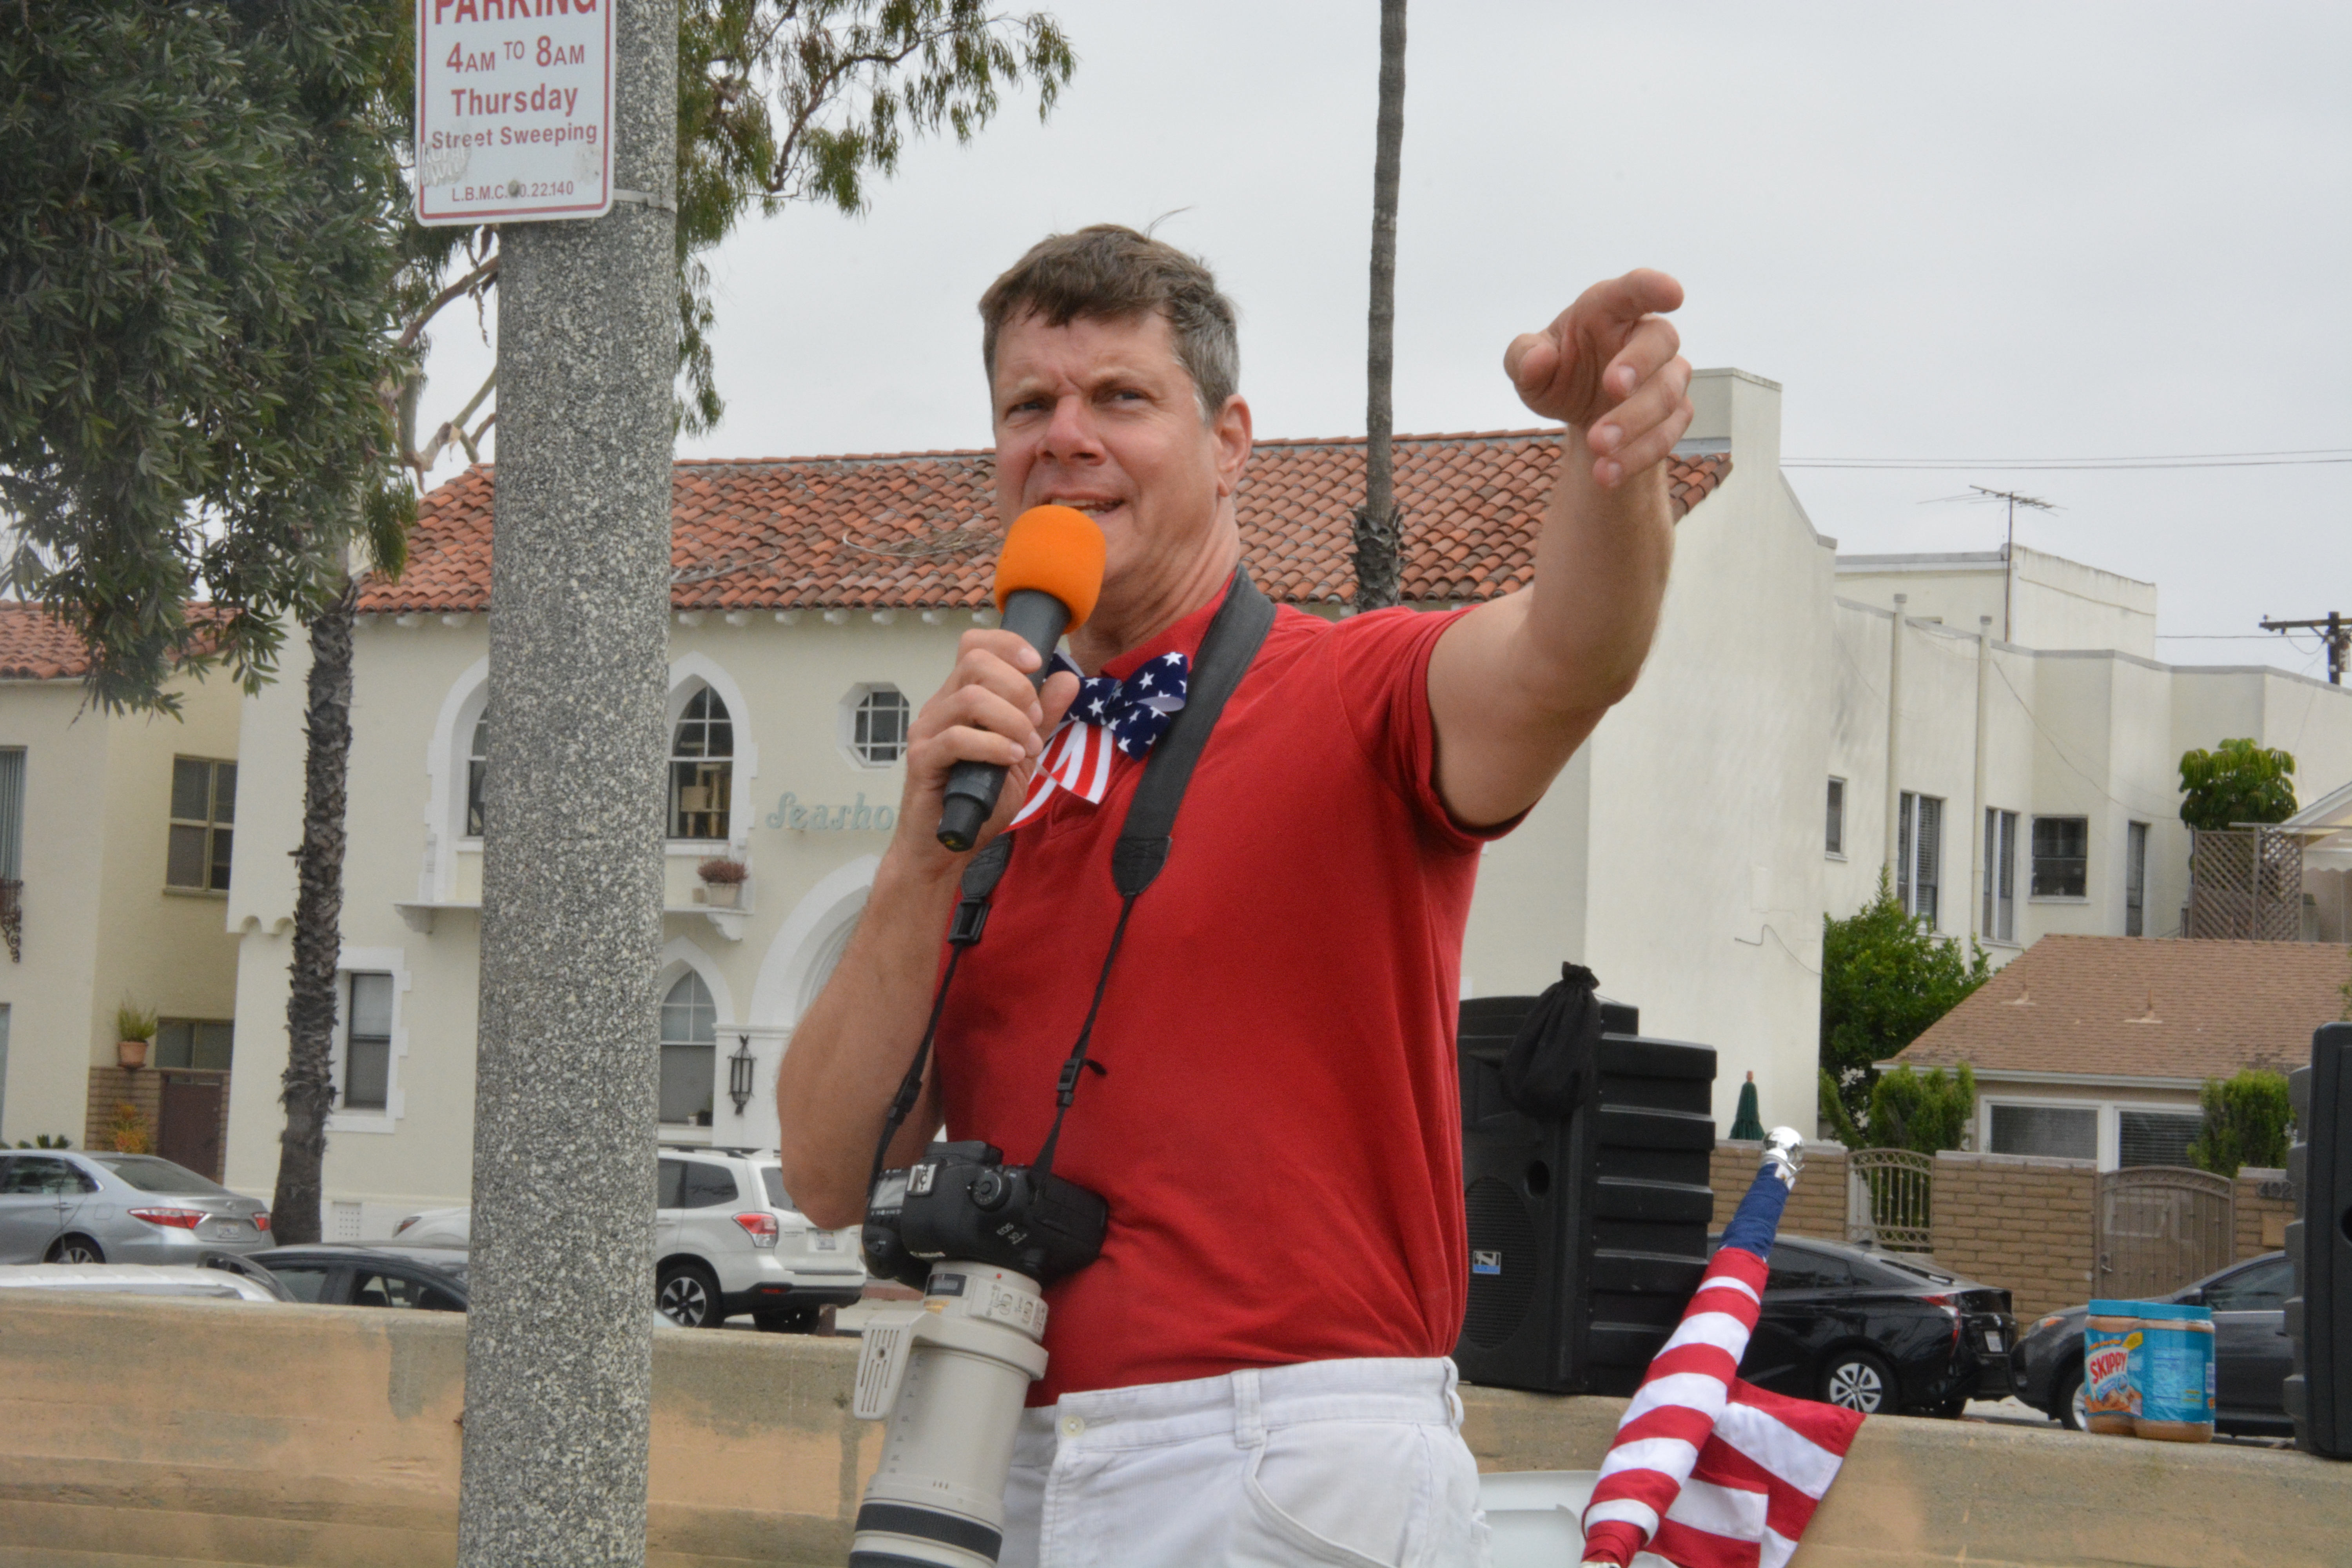 Community activist Justin Rudd wears a camera around his neck and a red-white-and-blue bow tie over his red polo shirt as he speaks on mic and points towards the crowd